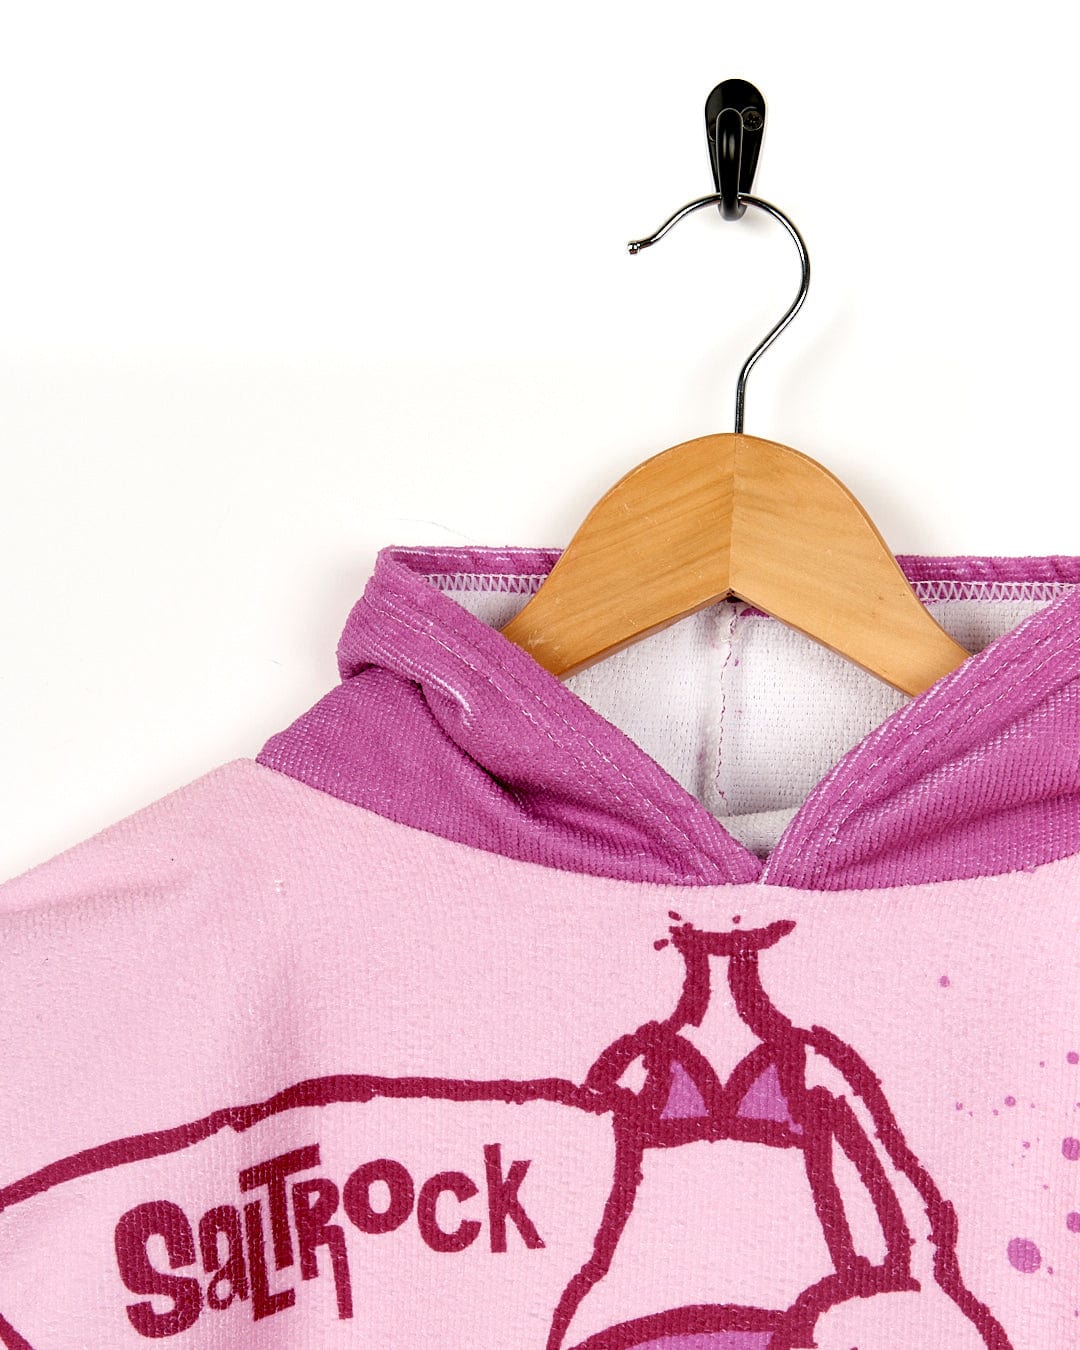 A Saltrock pink hoodie with an image of a girl riding a surfboard.